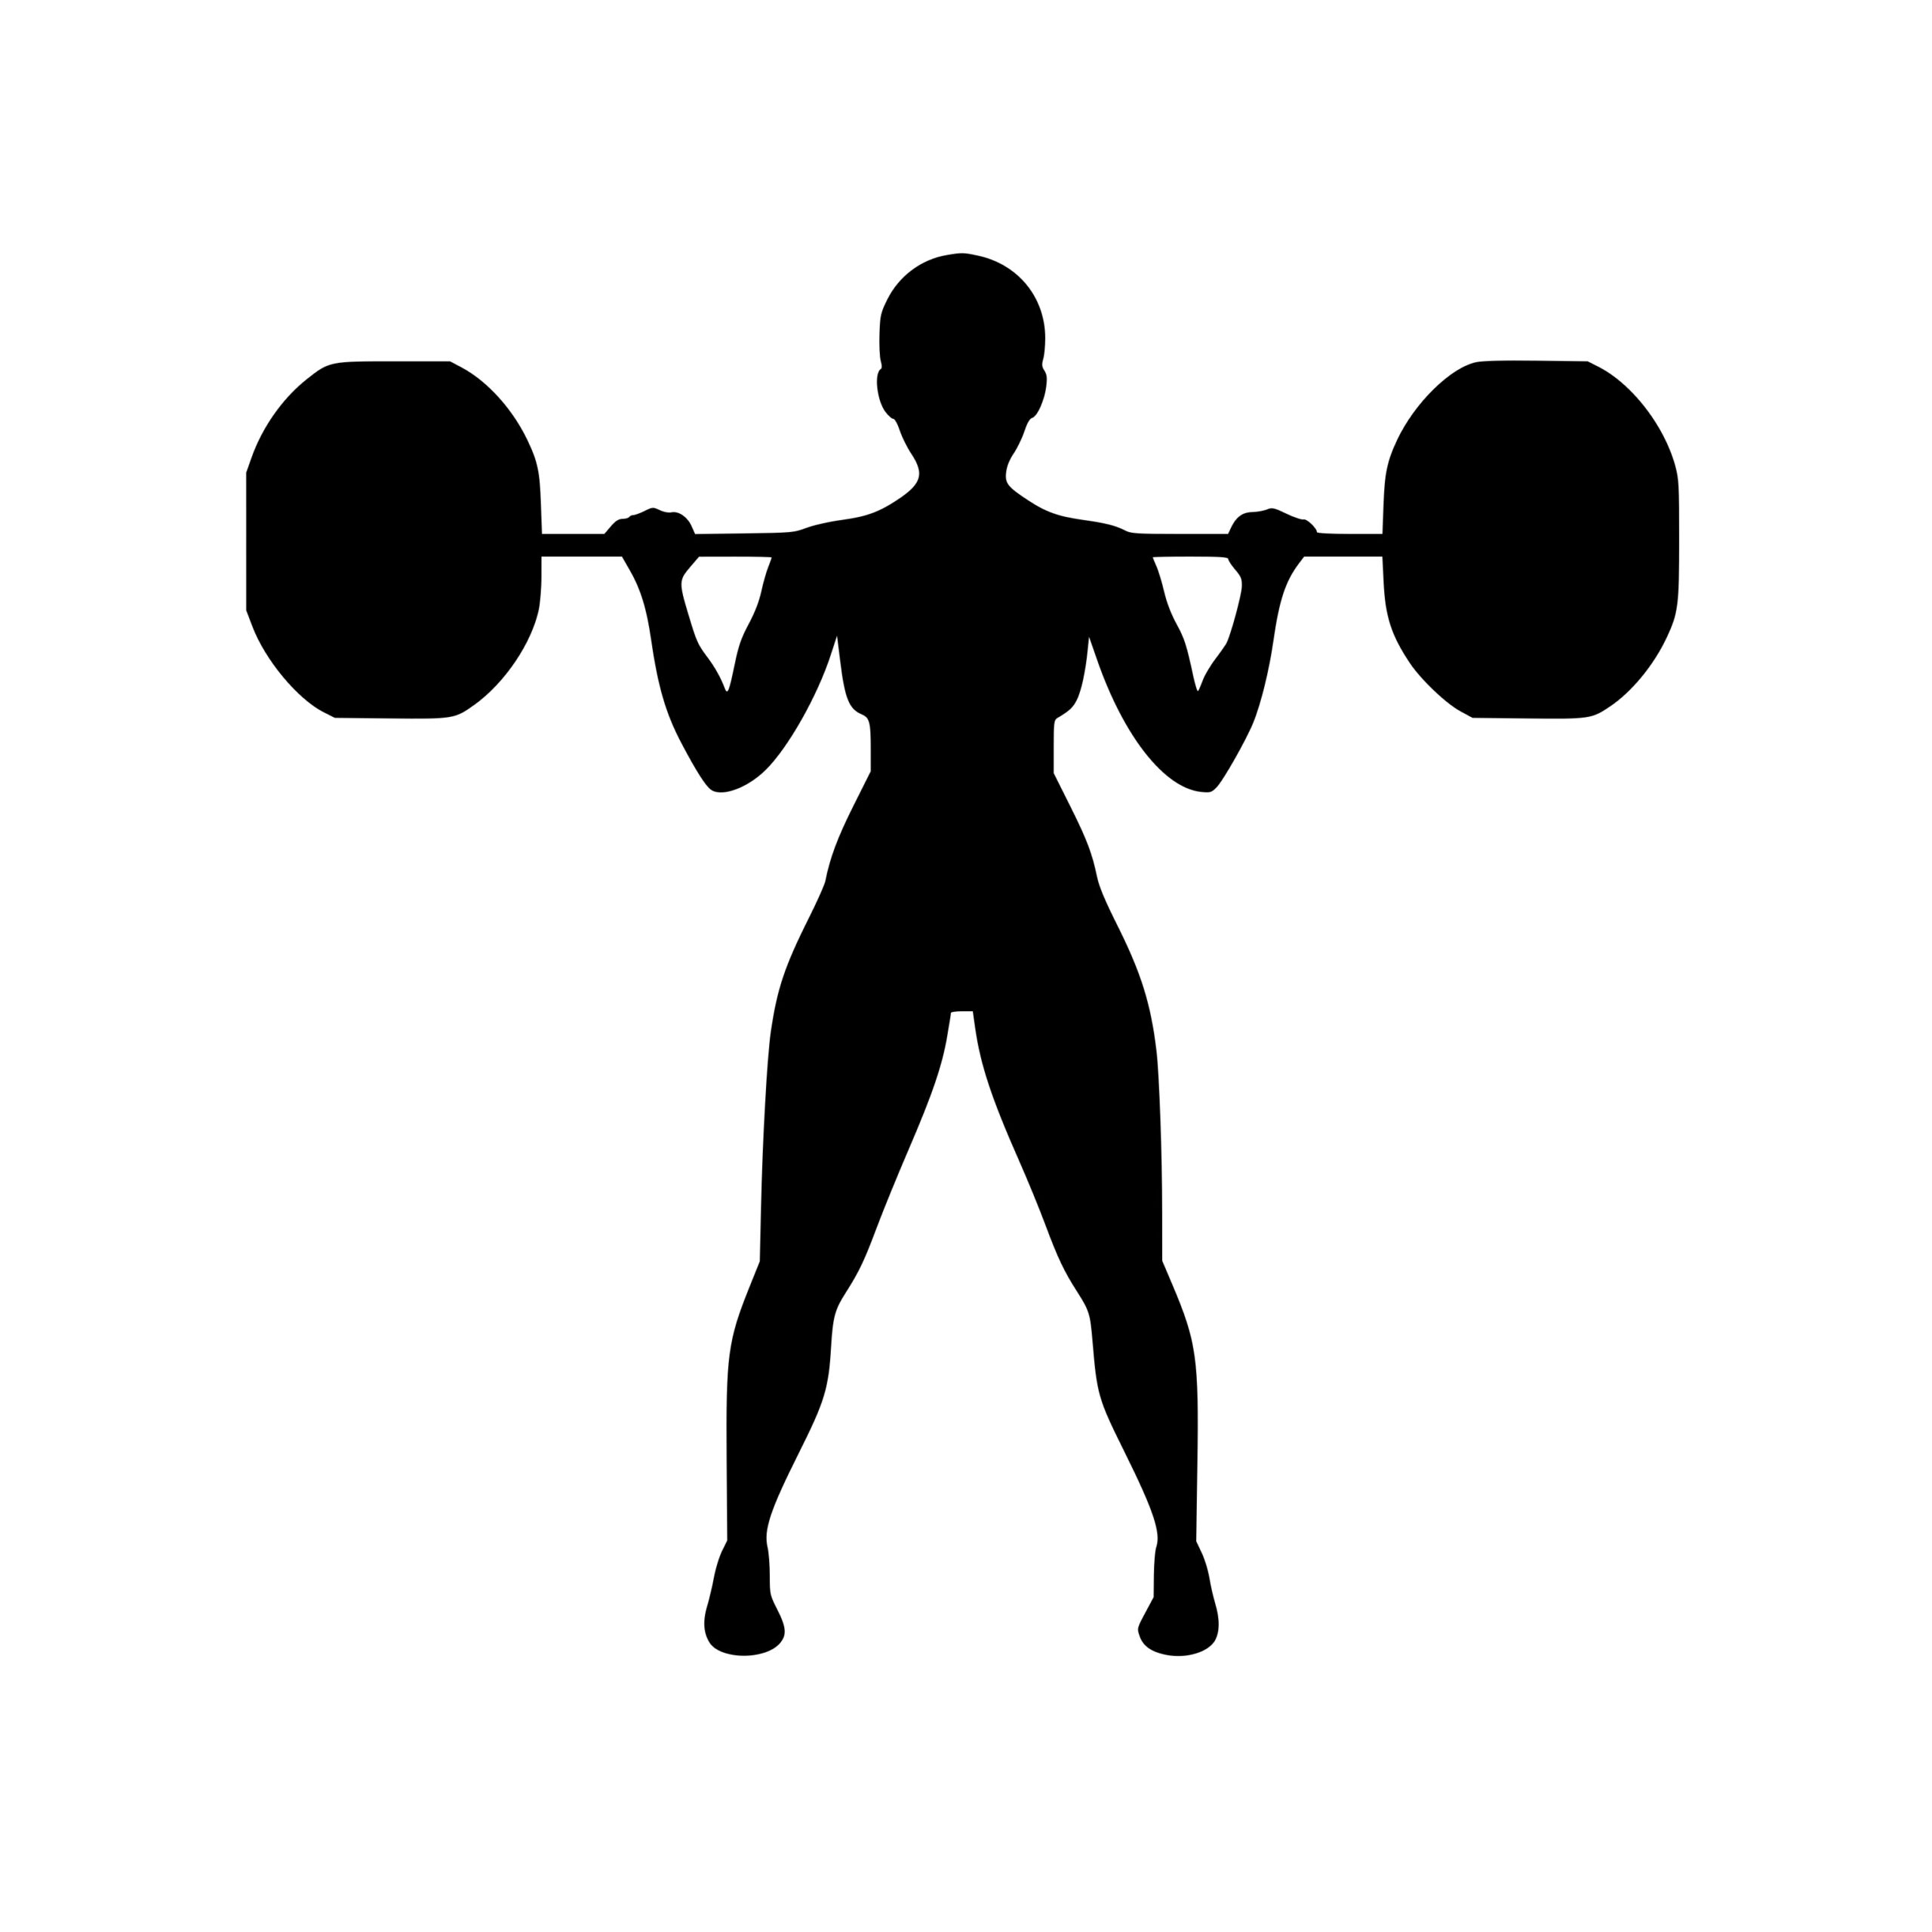 Female Weightlifter Lifting Heavy Weights · Creative Fabrica